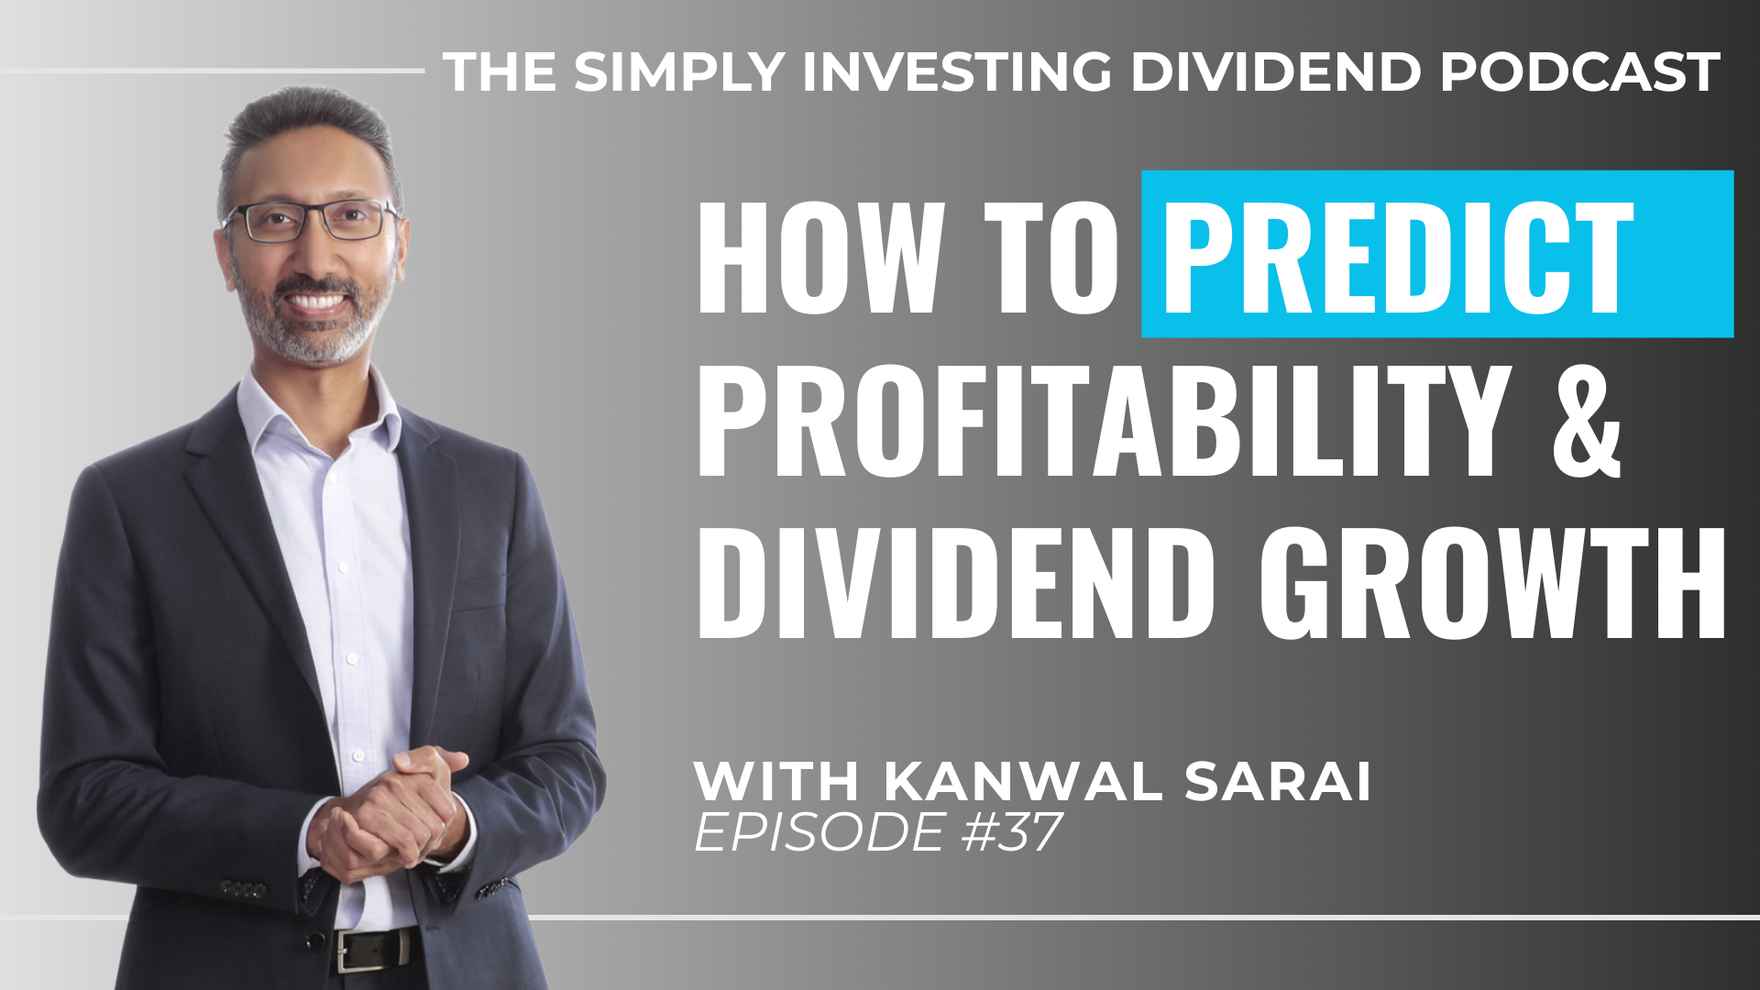 Simply Investing Dividend Podcast Episode 37 - The Key to Predicting Future Profitability and Dividend Growth